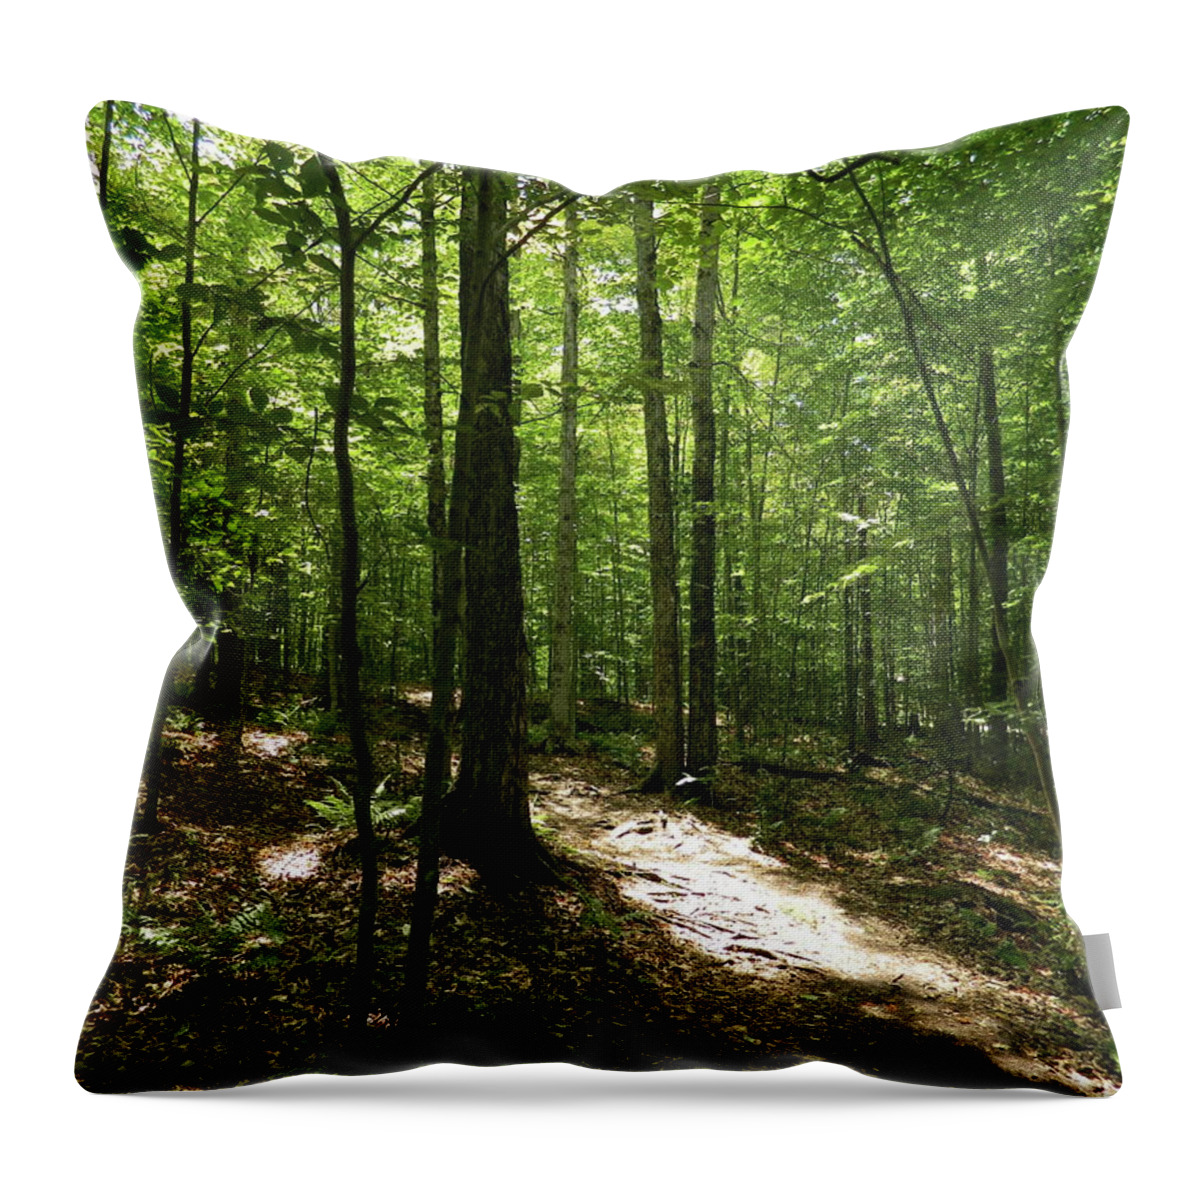  Throw Pillow featuring the photograph Trees-2 by Adrian Maggio